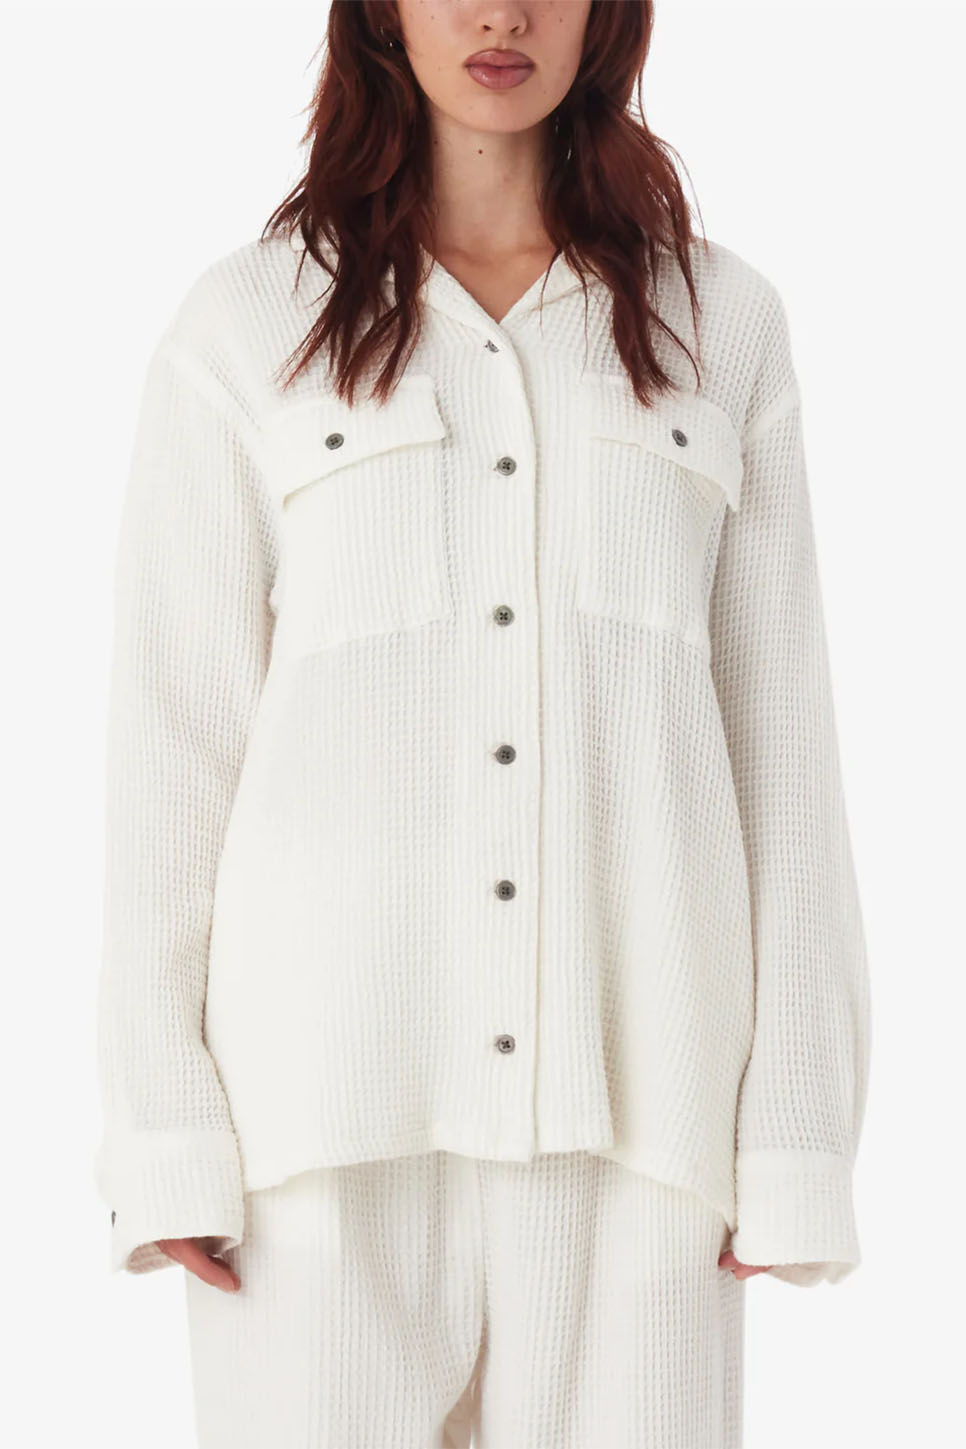 Obey - Camille Waffle Shirt - Muted White - Front